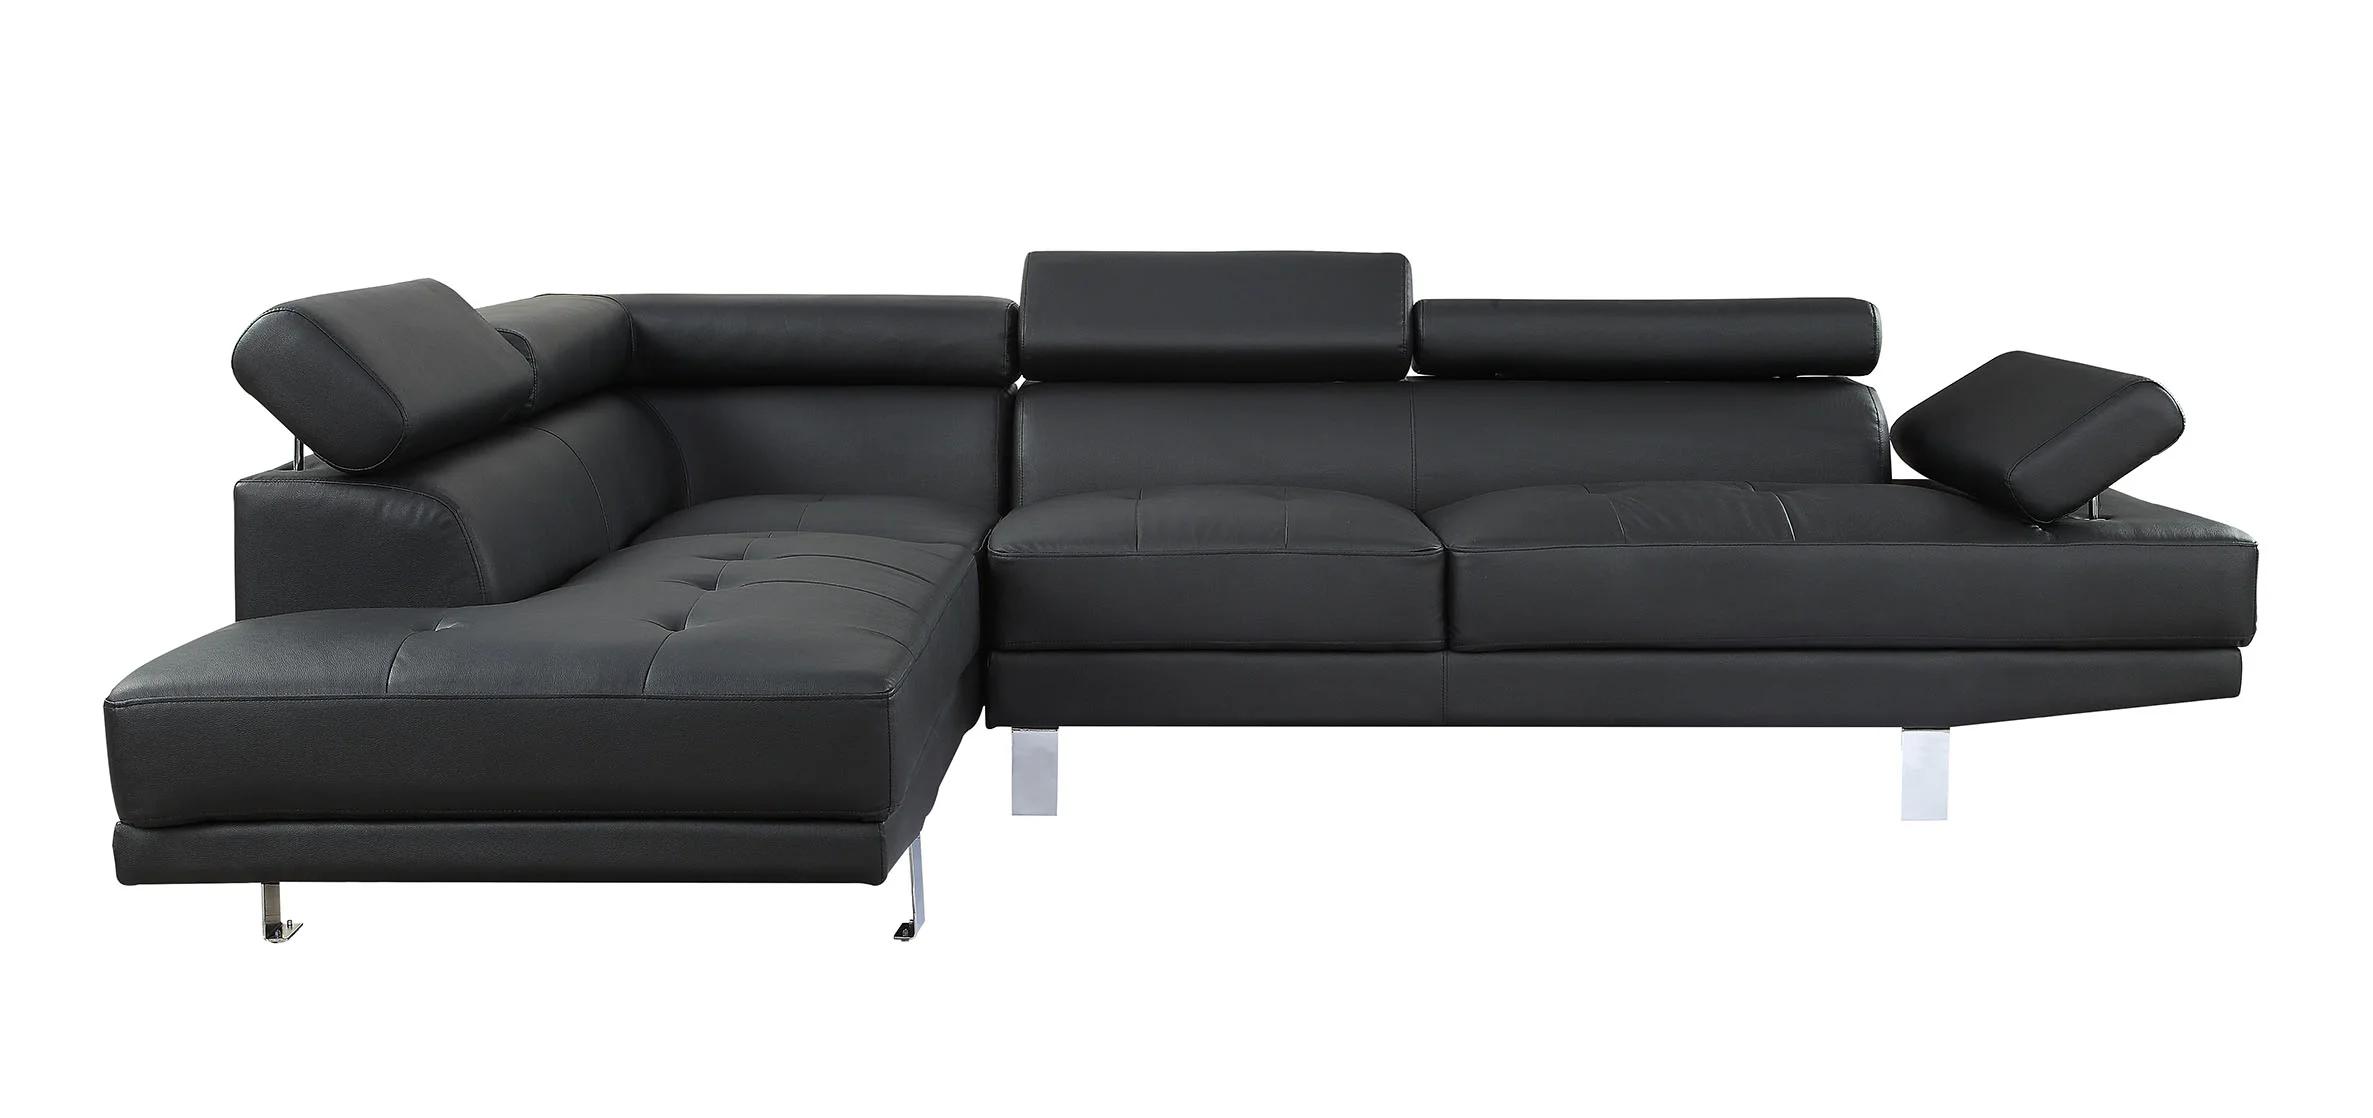 Contemporary Sectional Sofa Connor 52650-3pcs in Black PU